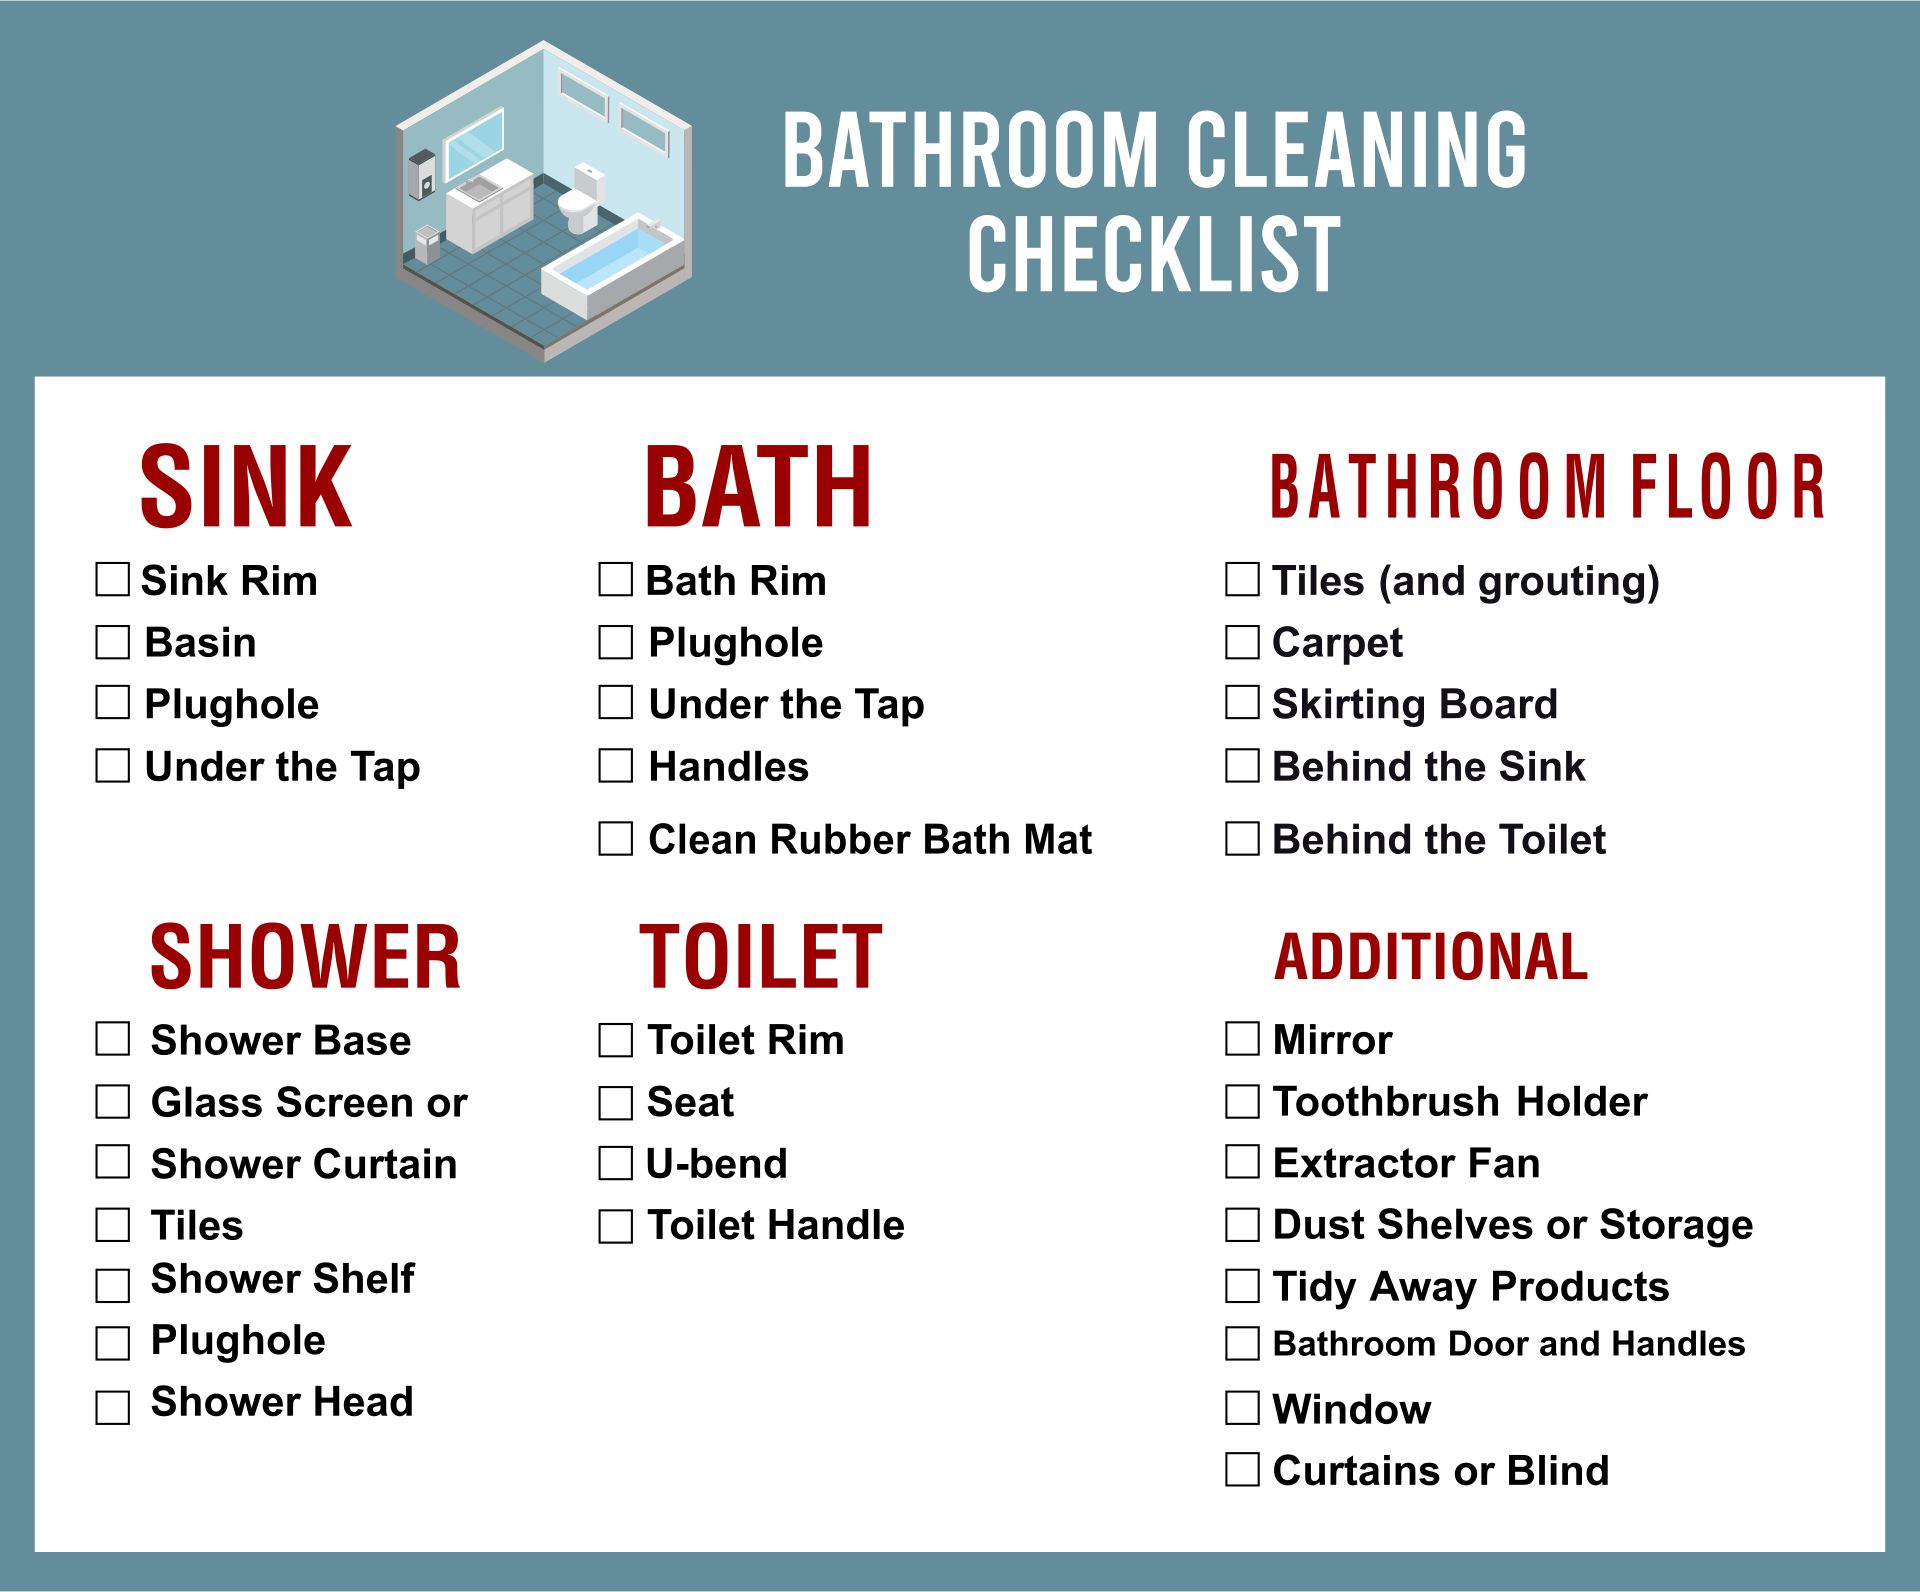 8 Best Images of Restroom Cleaning Schedule Printable Daily Bathroom